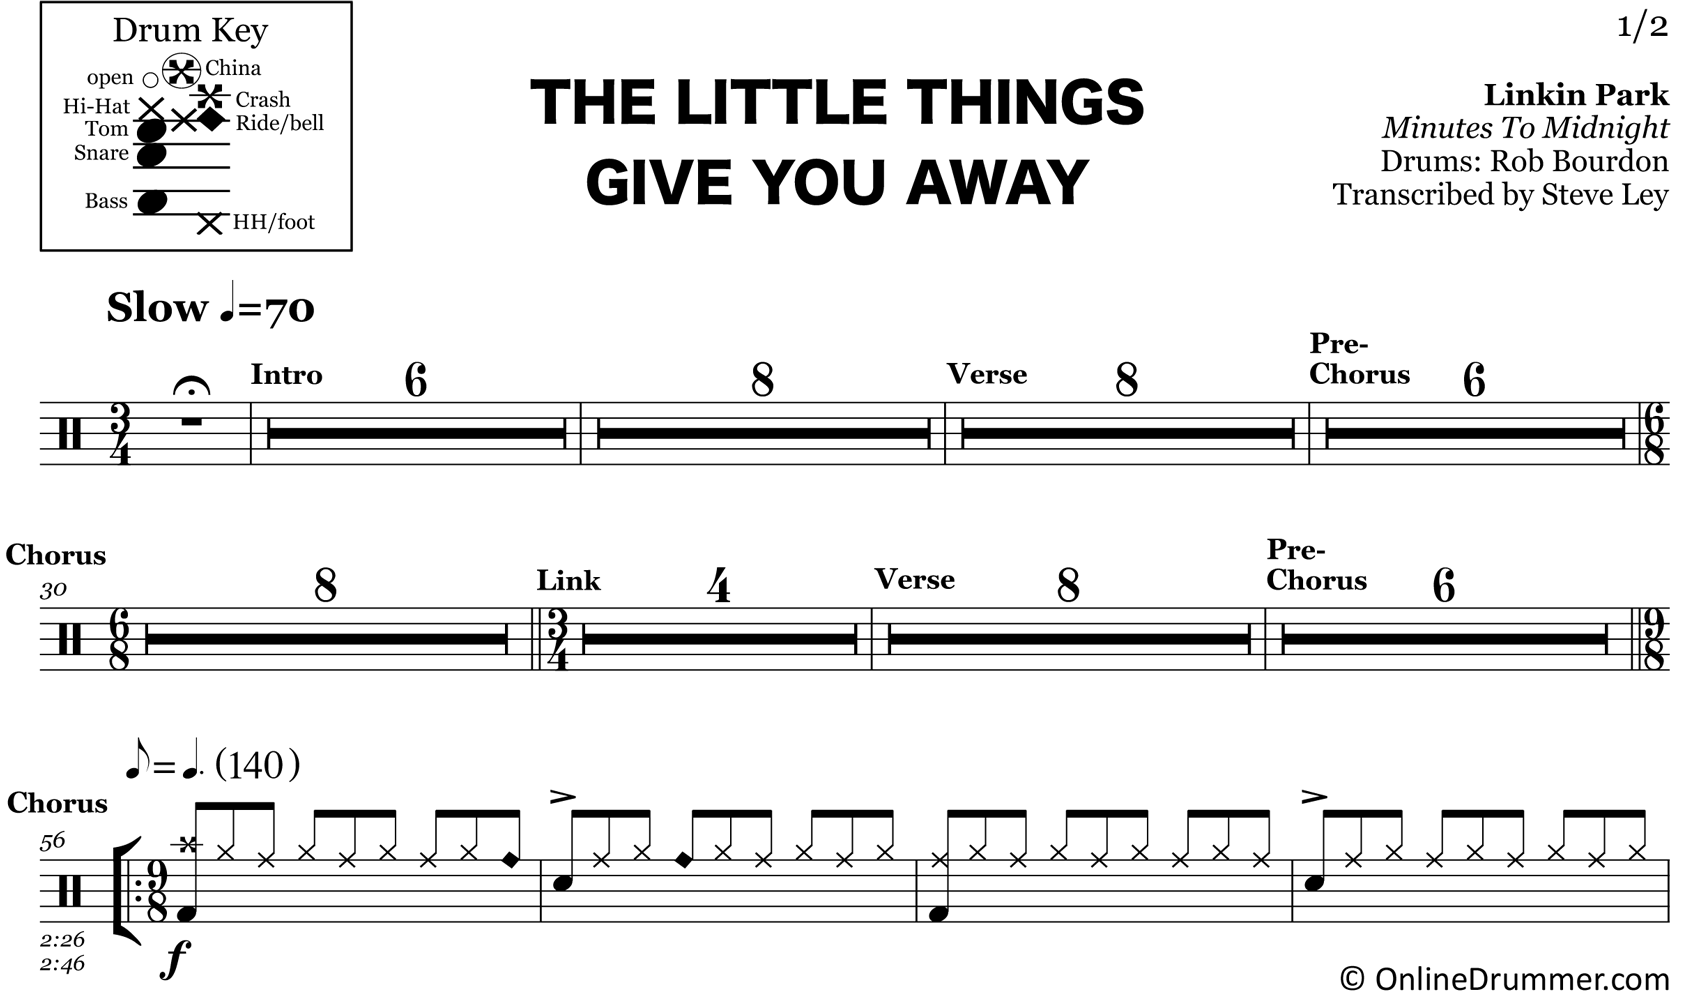 The Little Things Give You Away - Linkin Park - Drum Sheet Music